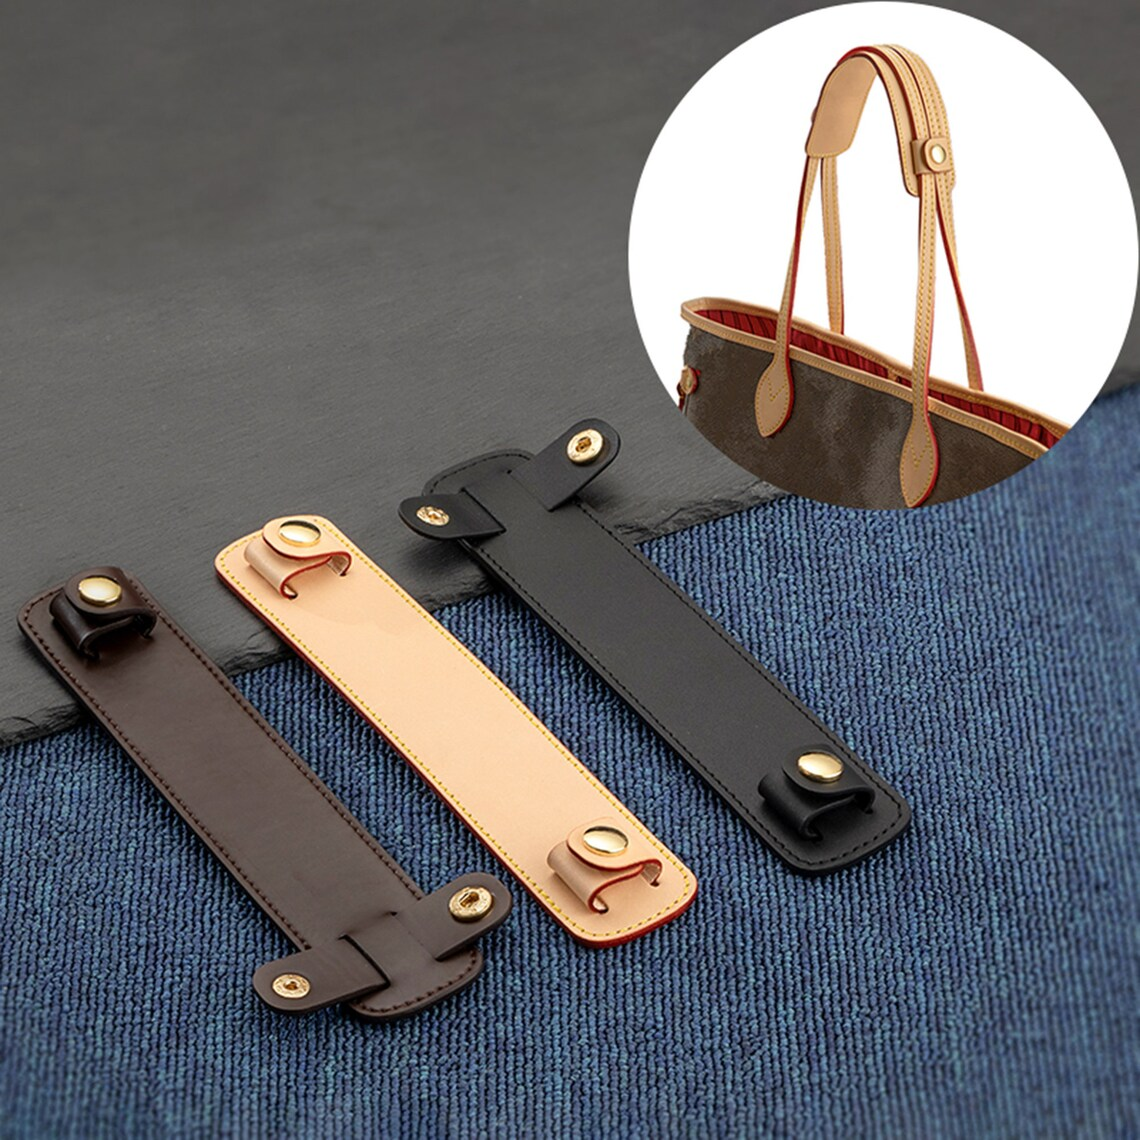 New design,High quality Vachette Leather Shoulder Strap Pad/Anti-slip pressure relief shoulder pad for handbags/pouch/clutch/Neverfull acc